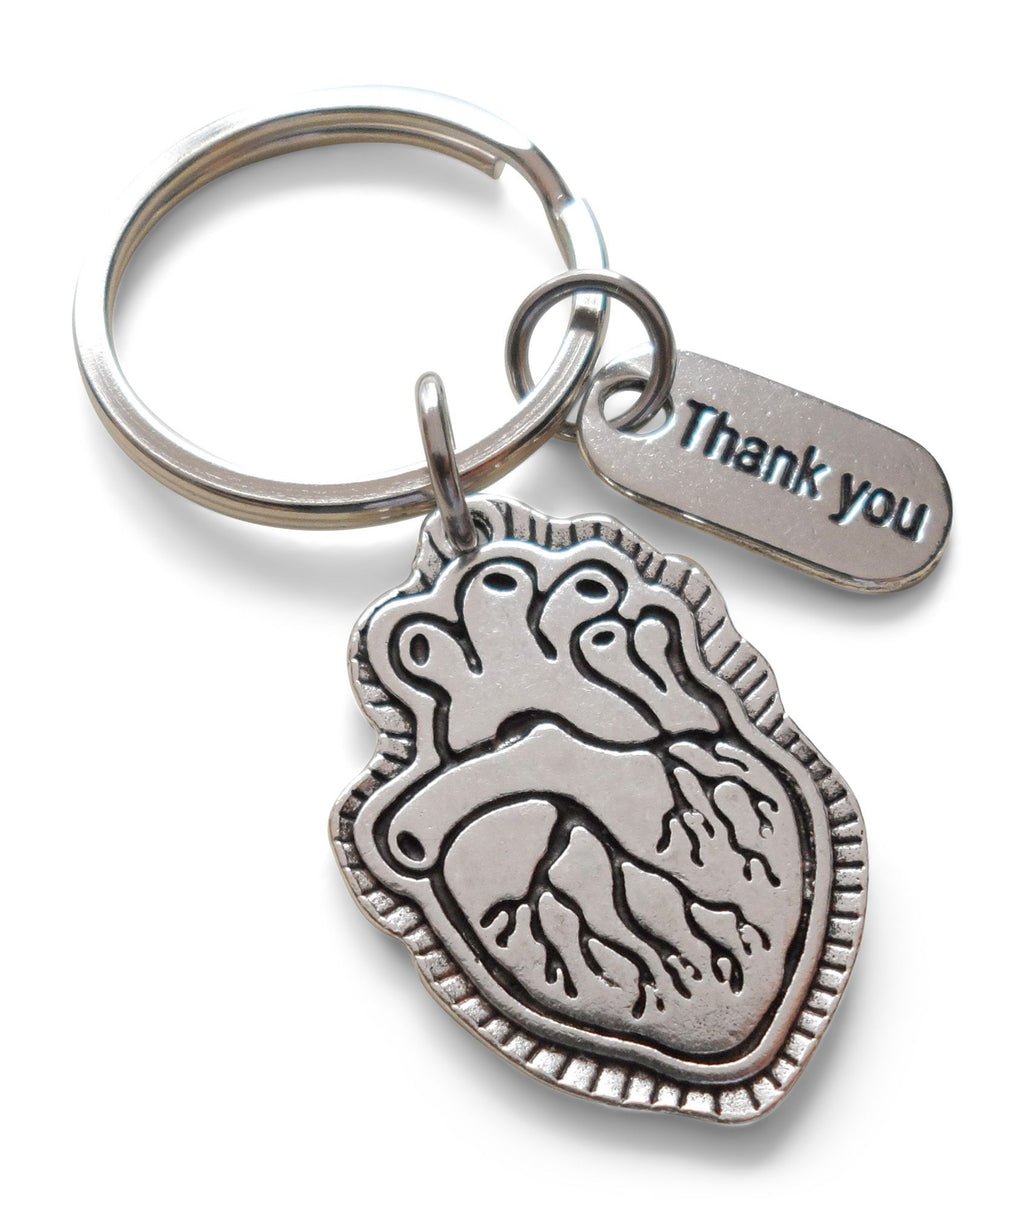 Anatomic Heart Charm Keychain with Thank You Charm, Doctor Office Gift, Hospital Staff Gift, Trainer Thank you Gift